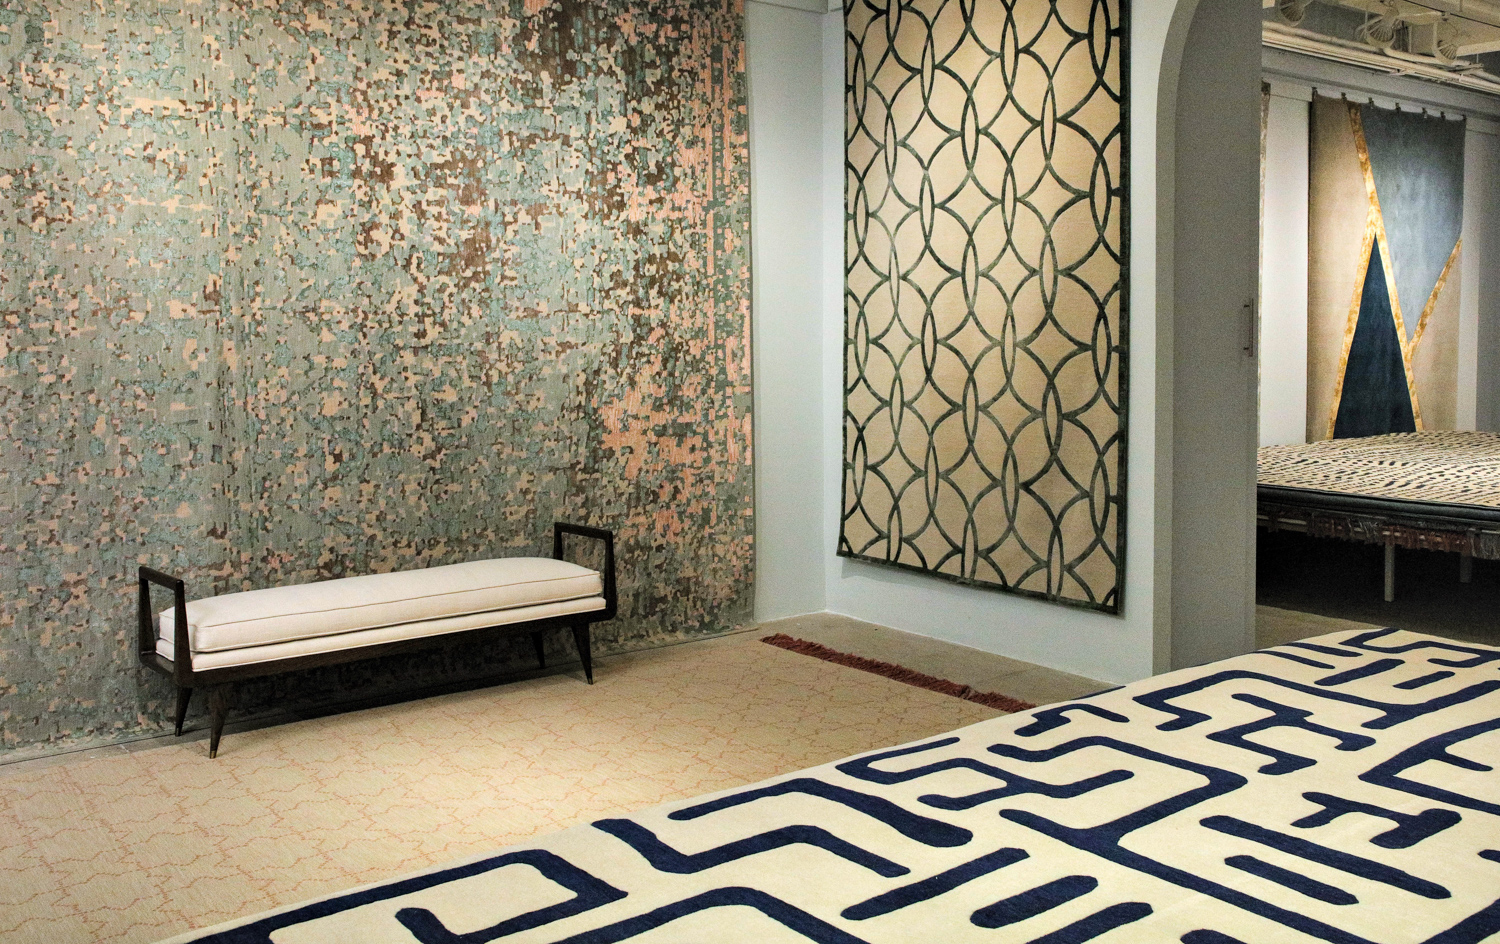 Jennifer Manners showroom with a bench against a wallpapered cover and a geometric fabric on display in the forefront